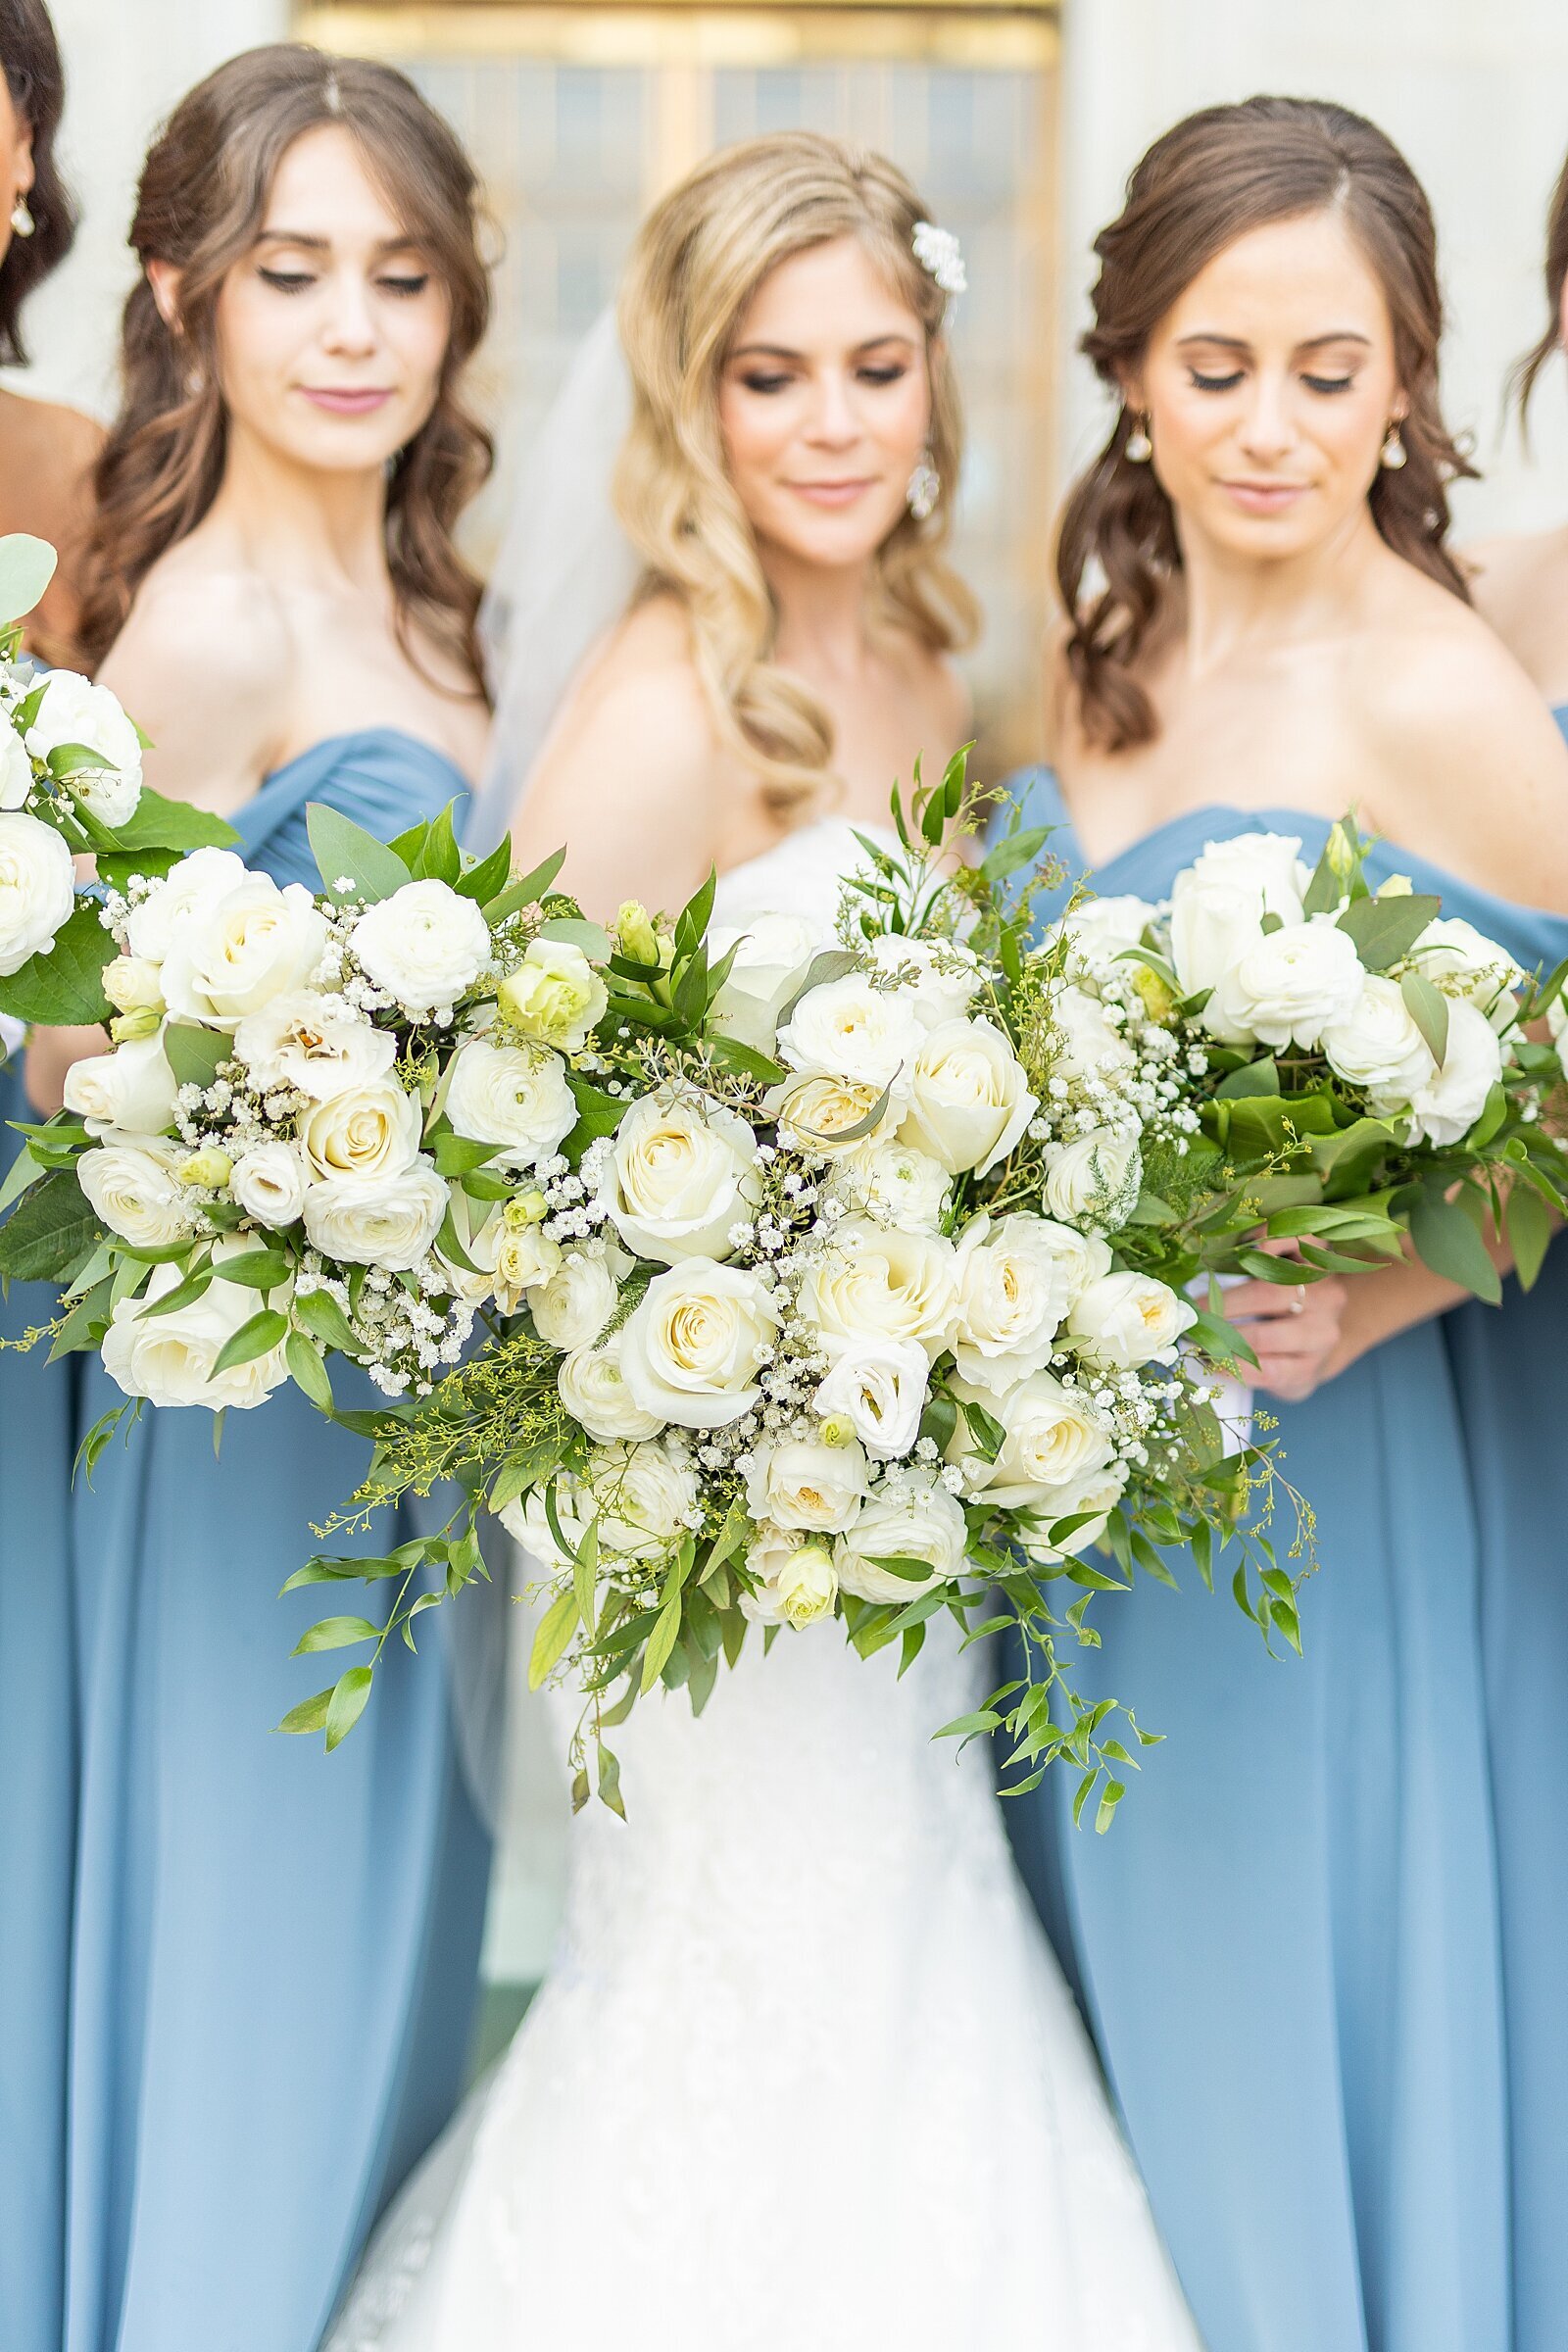 Bride in white lace gown and bridesmaids wearing Azazie blue dresses holding white flower bouquets.